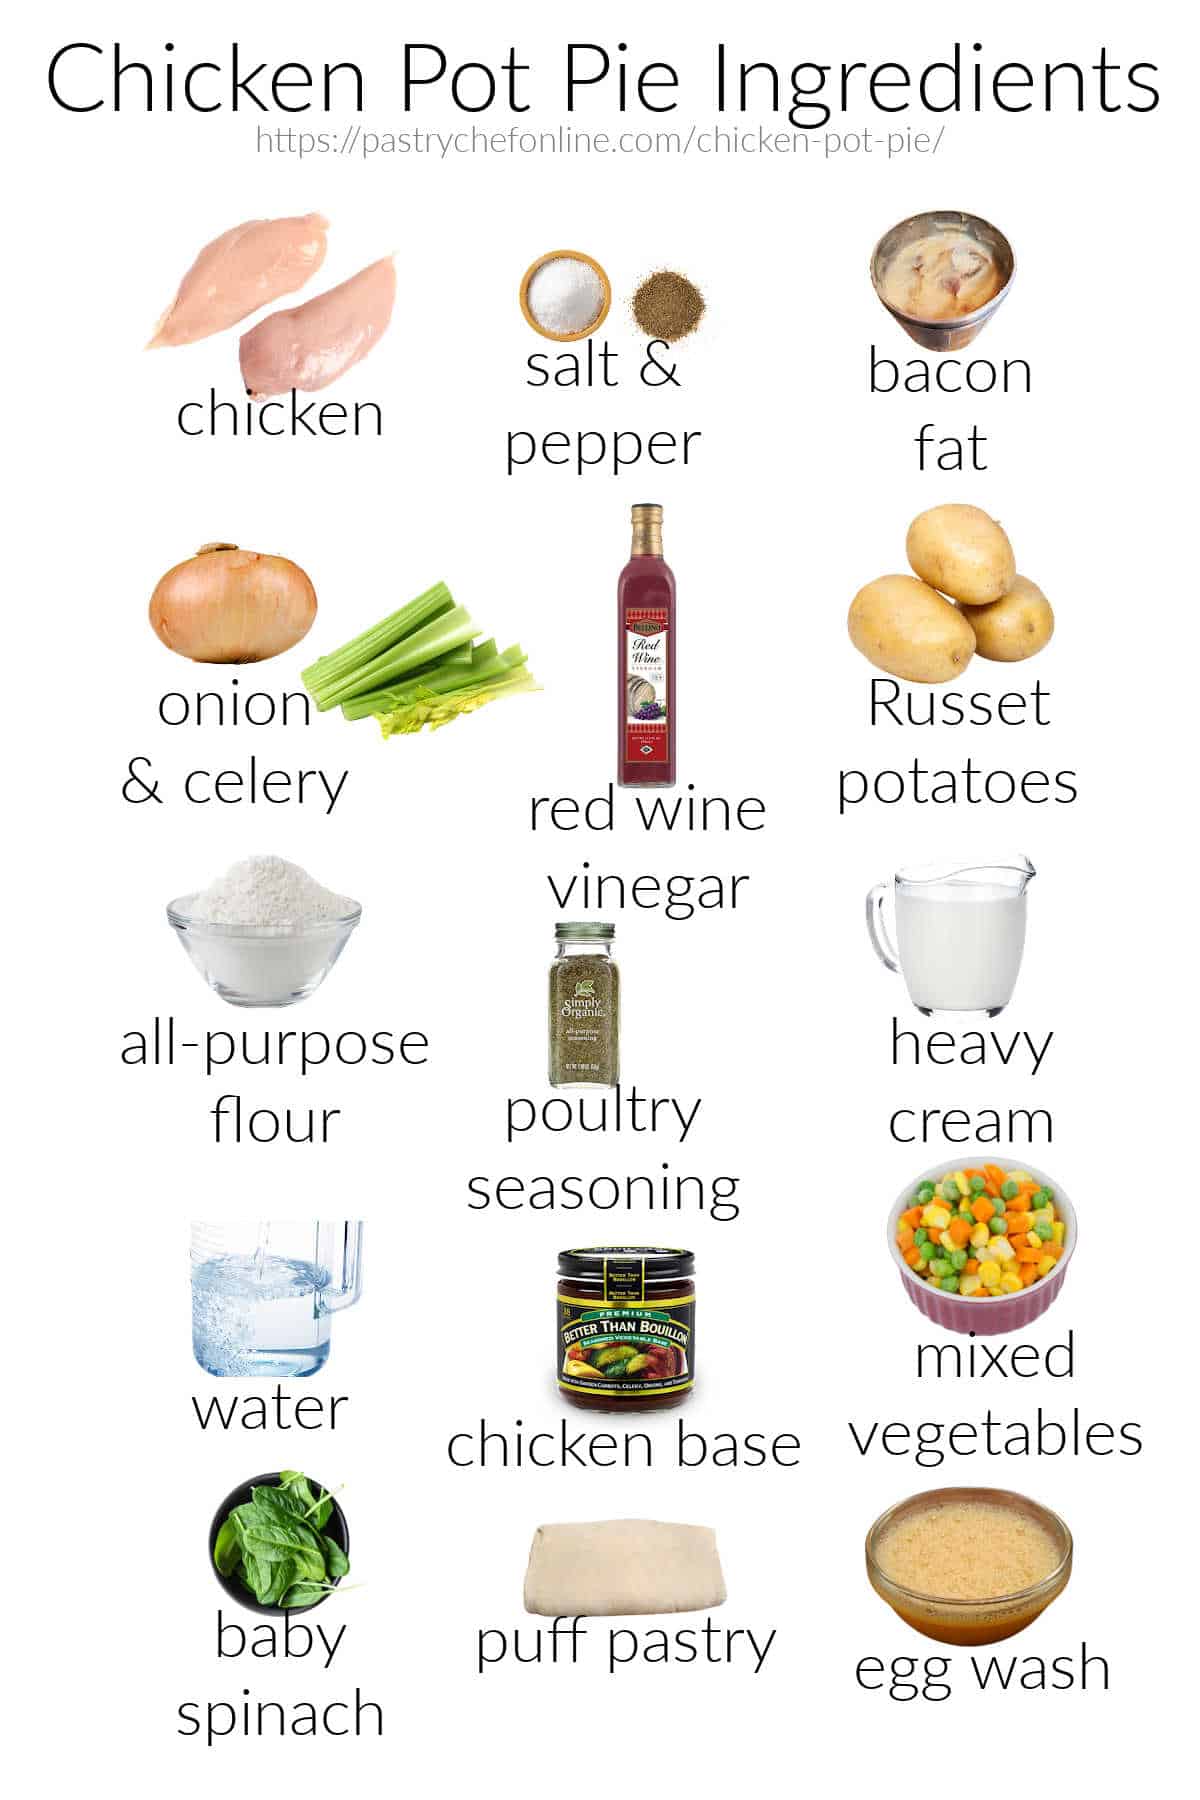 Images of all the ingredients needed for making chicken pot pie, labeled and on a white background.